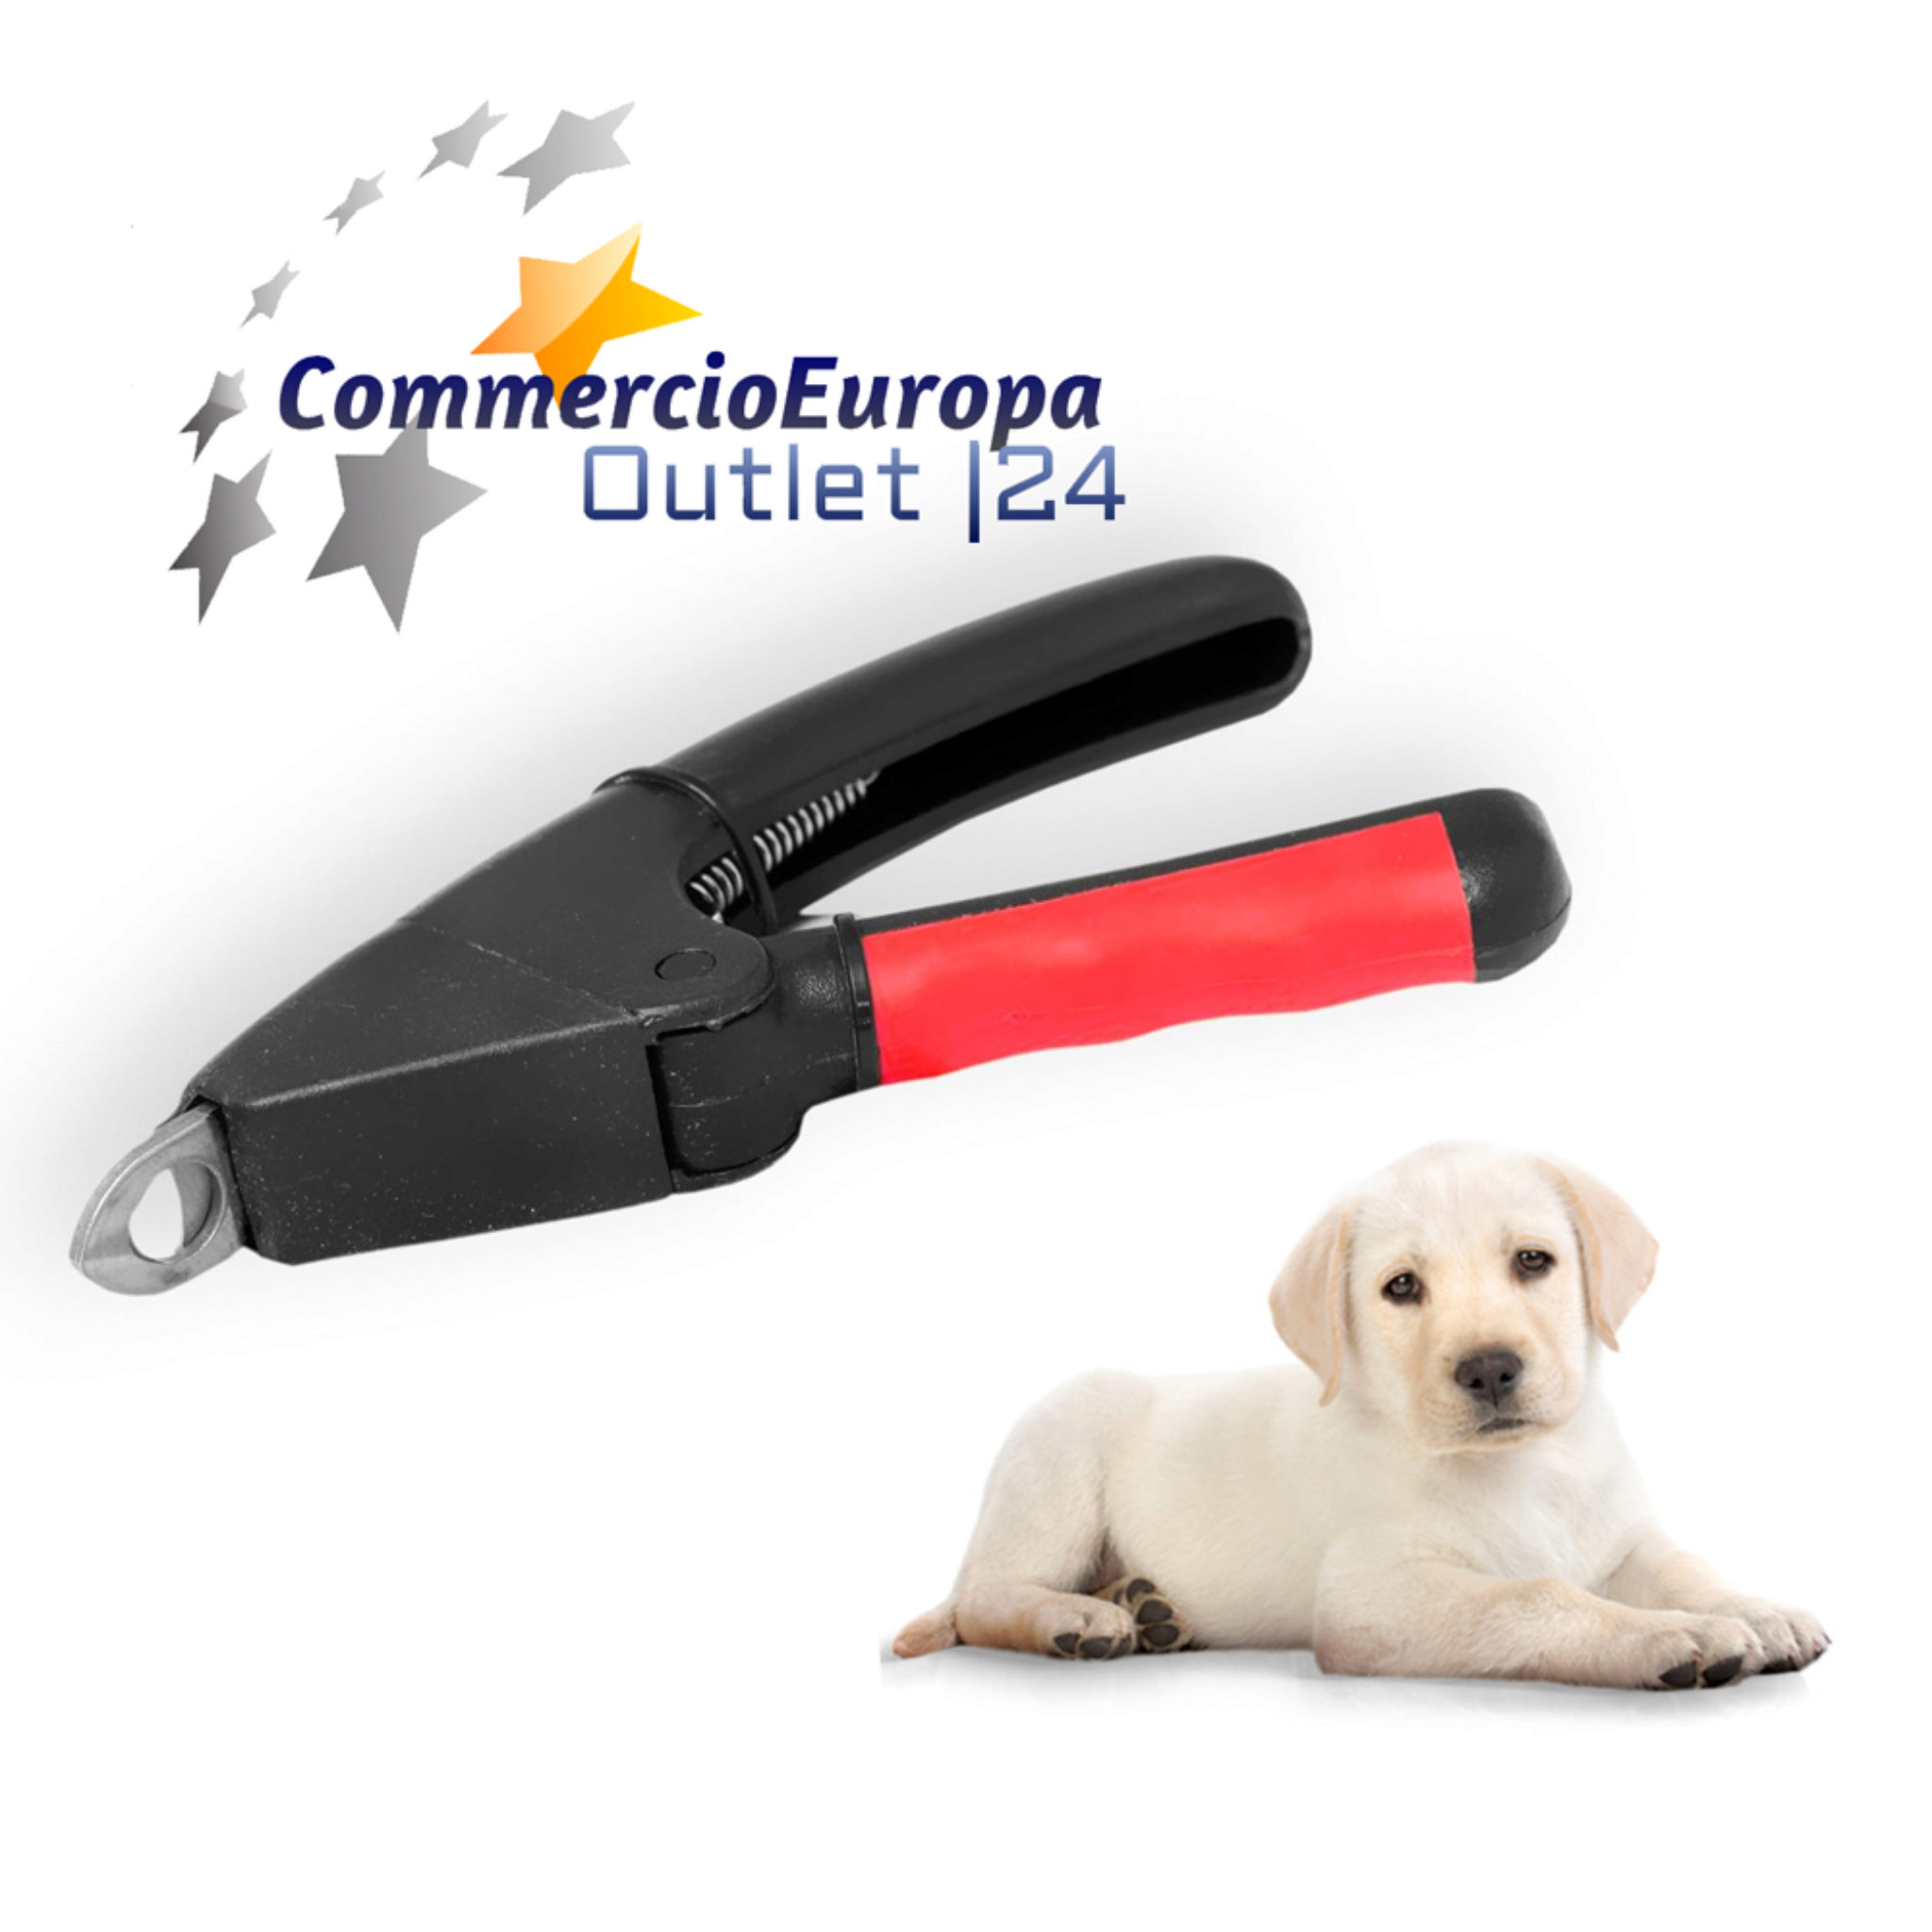 The Best Dog Grooming Clippers recensione